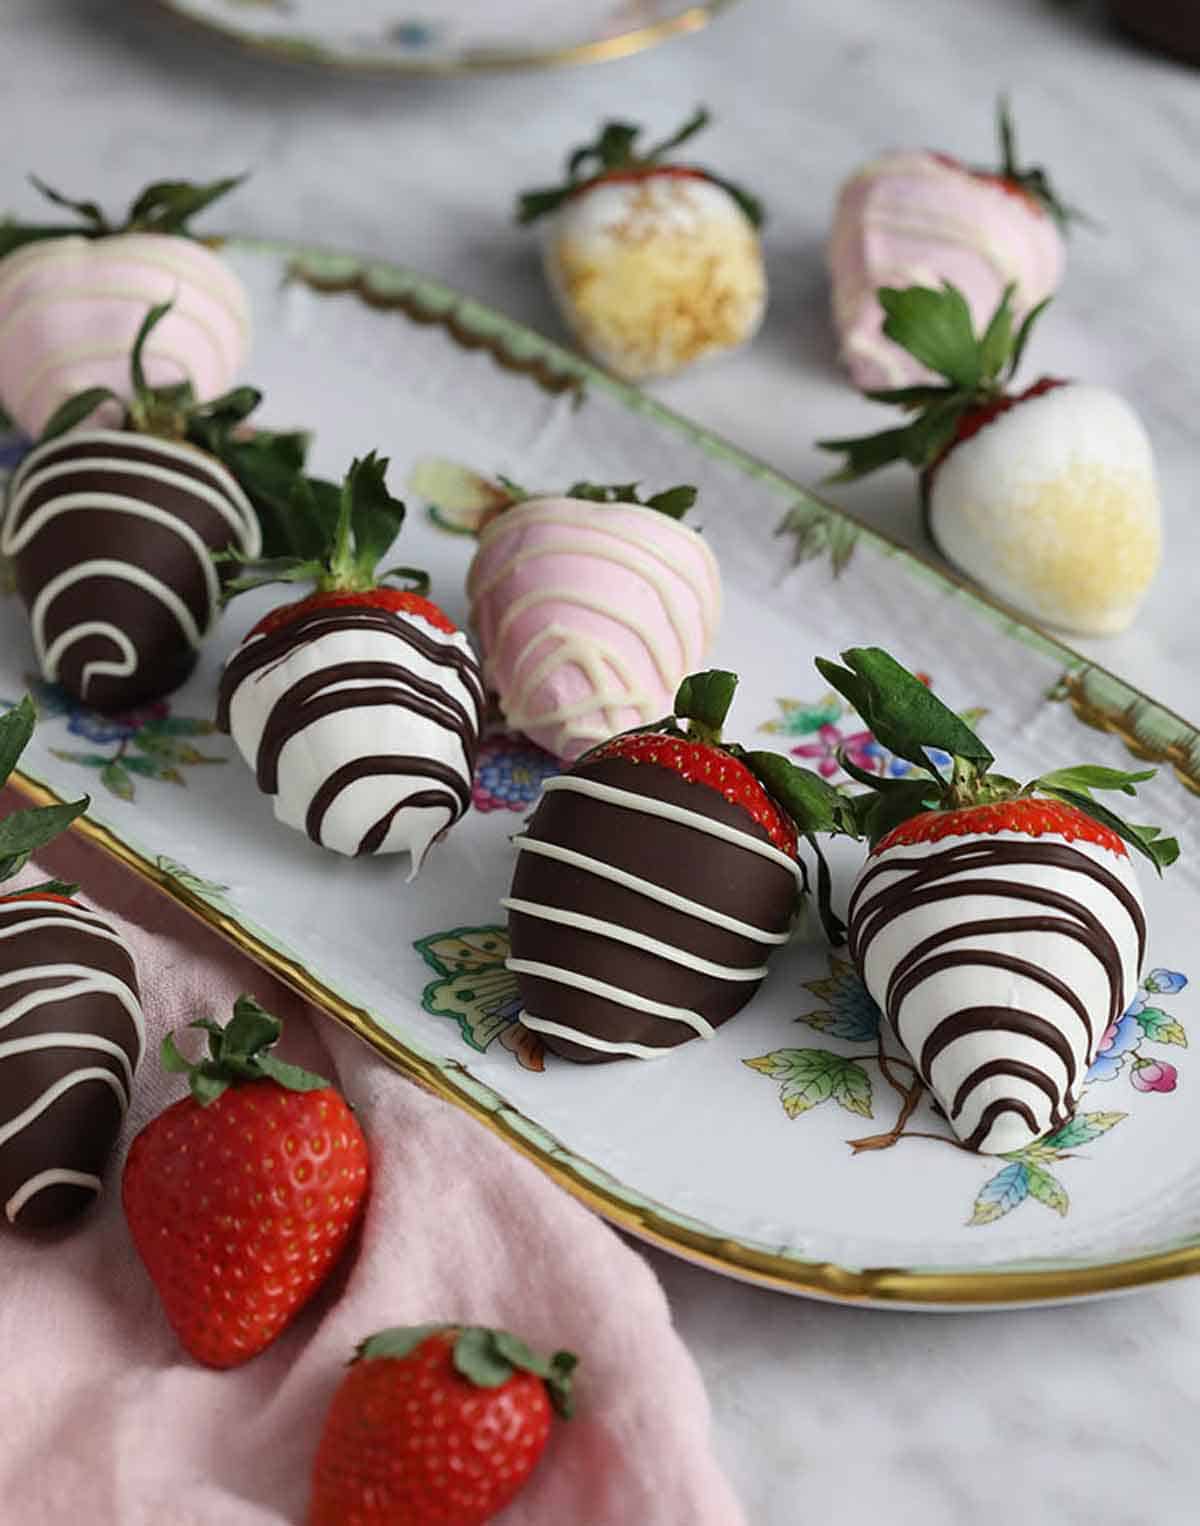 A platter of chocolate covered strawberries with different chocolate coatings.